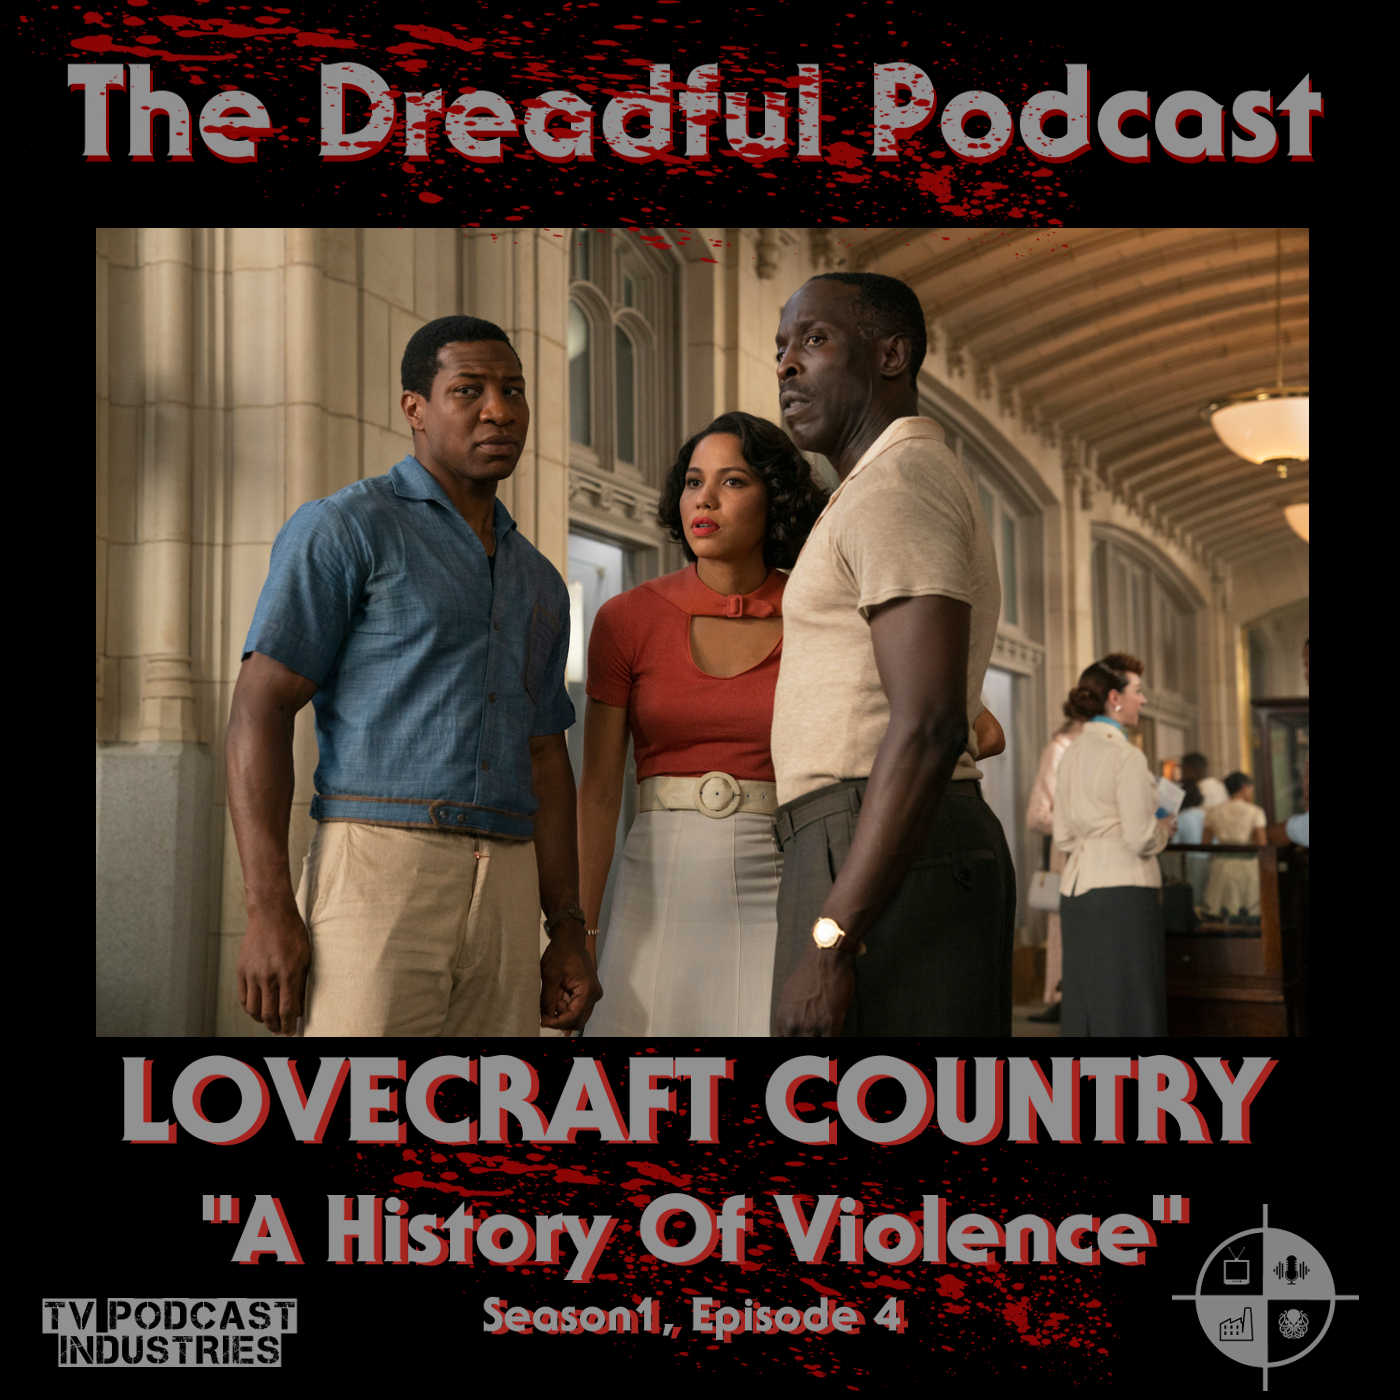 Lovecraft Country Episode 4 “A History of Violence” Podcast